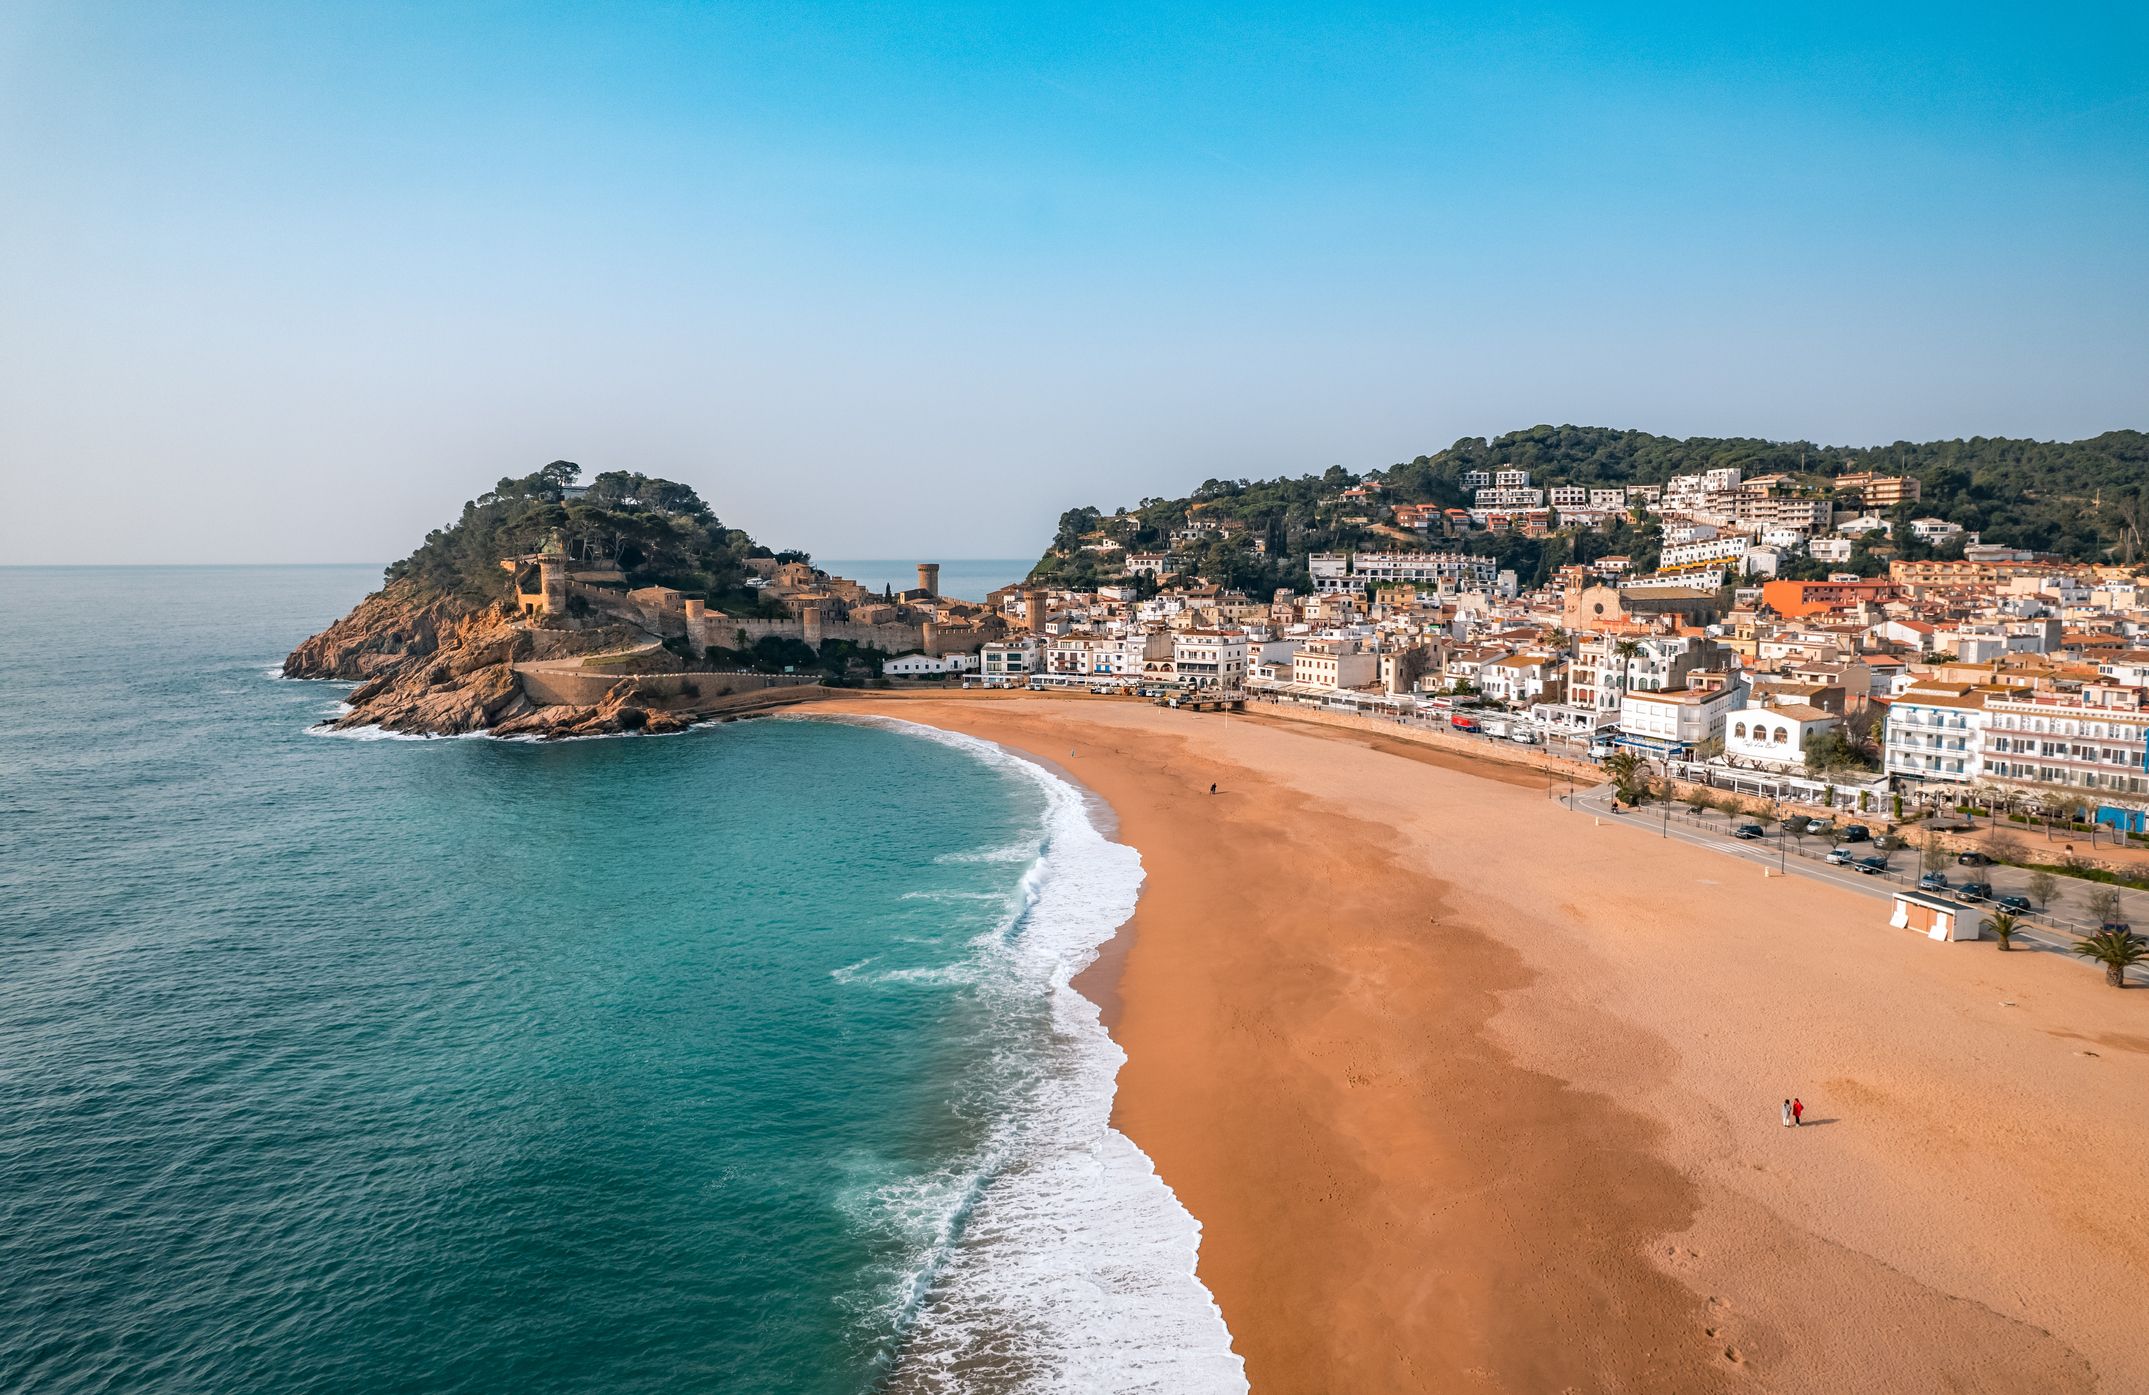 <p>Like <a href="https://www.goodhousekeeping.com/uk/lifestyle/travel/g38352292/portugal-holiday-destinations/">Portugal</a> and <a href="https://www.goodhousekeeping.com/uk/lifestyle/travel/g38529909/greece-holiday-destinations/">Greece</a>, Spain is a perennial favourite holiday destination for us Brits. From its sunny cities such as Barcelona and Seville, to its capital Madrid, there are lots of holiday destinations in Spain that are perfect for a cultural city break. If it's beaches you want, head south to the sun-baked shores of Marbella.</p><p>The country is home to various island groups, too. The Balearics, consisting of Mallorca, Menorca, Ibiza and lesser-visited Formentera, are perfect holiday choices. Ibiza may have a rowdy reputation, but in reality the island has a much more serene side and Dalt Vila, its hilltop old town, is beautiful. </p><p>And Mallorca may be a more popular choice, but Menorca is just as captivating, with its charming port towns and rural retreats – we love <a href="https://www.goodhousekeepingholidays.com/offers/spain-menorca-villa-blanc-gran-melia-hotel">Villa Le Blanc Gran Meliá</a> on the Santo Tomàs seafront.</p><p>Over in the volcanic <a href="https://www.goodhousekeeping.com/uk/lifestyle/travel/a37231292/best-canary-island/">Canary Islands</a>, there are more sunny Spanish holiday destinations to choose from, including old favourites Lanzarote and <a href="https://www.goodhousekeeping.com/uk/lifestyle/travel/g38188264/best-hotels-tenerife/">Tenerife</a>, the latter of which has a dream hotel for foodies in the form of the <a href="https://www.goodhousekeepingholidays.com/offers/tenerife-guia-de-isora-abama-ritz-carlton-hotel">Ritz-Carlton Abama</a>.</p><p>And in the heart of Andalucia, <a href="https://www.booking.com/hotel/es/haciendadesanrafael.en-gb.html?aid=1922306&label=spain-holiday-destinations-intro">Hacienda de San Rafael</a> is the perfect base if you're hoping to explore Seville and its imposing Gothic cathedral.</p><p>Read on for the best destinations in Spain for this year's summer holiday.</p>